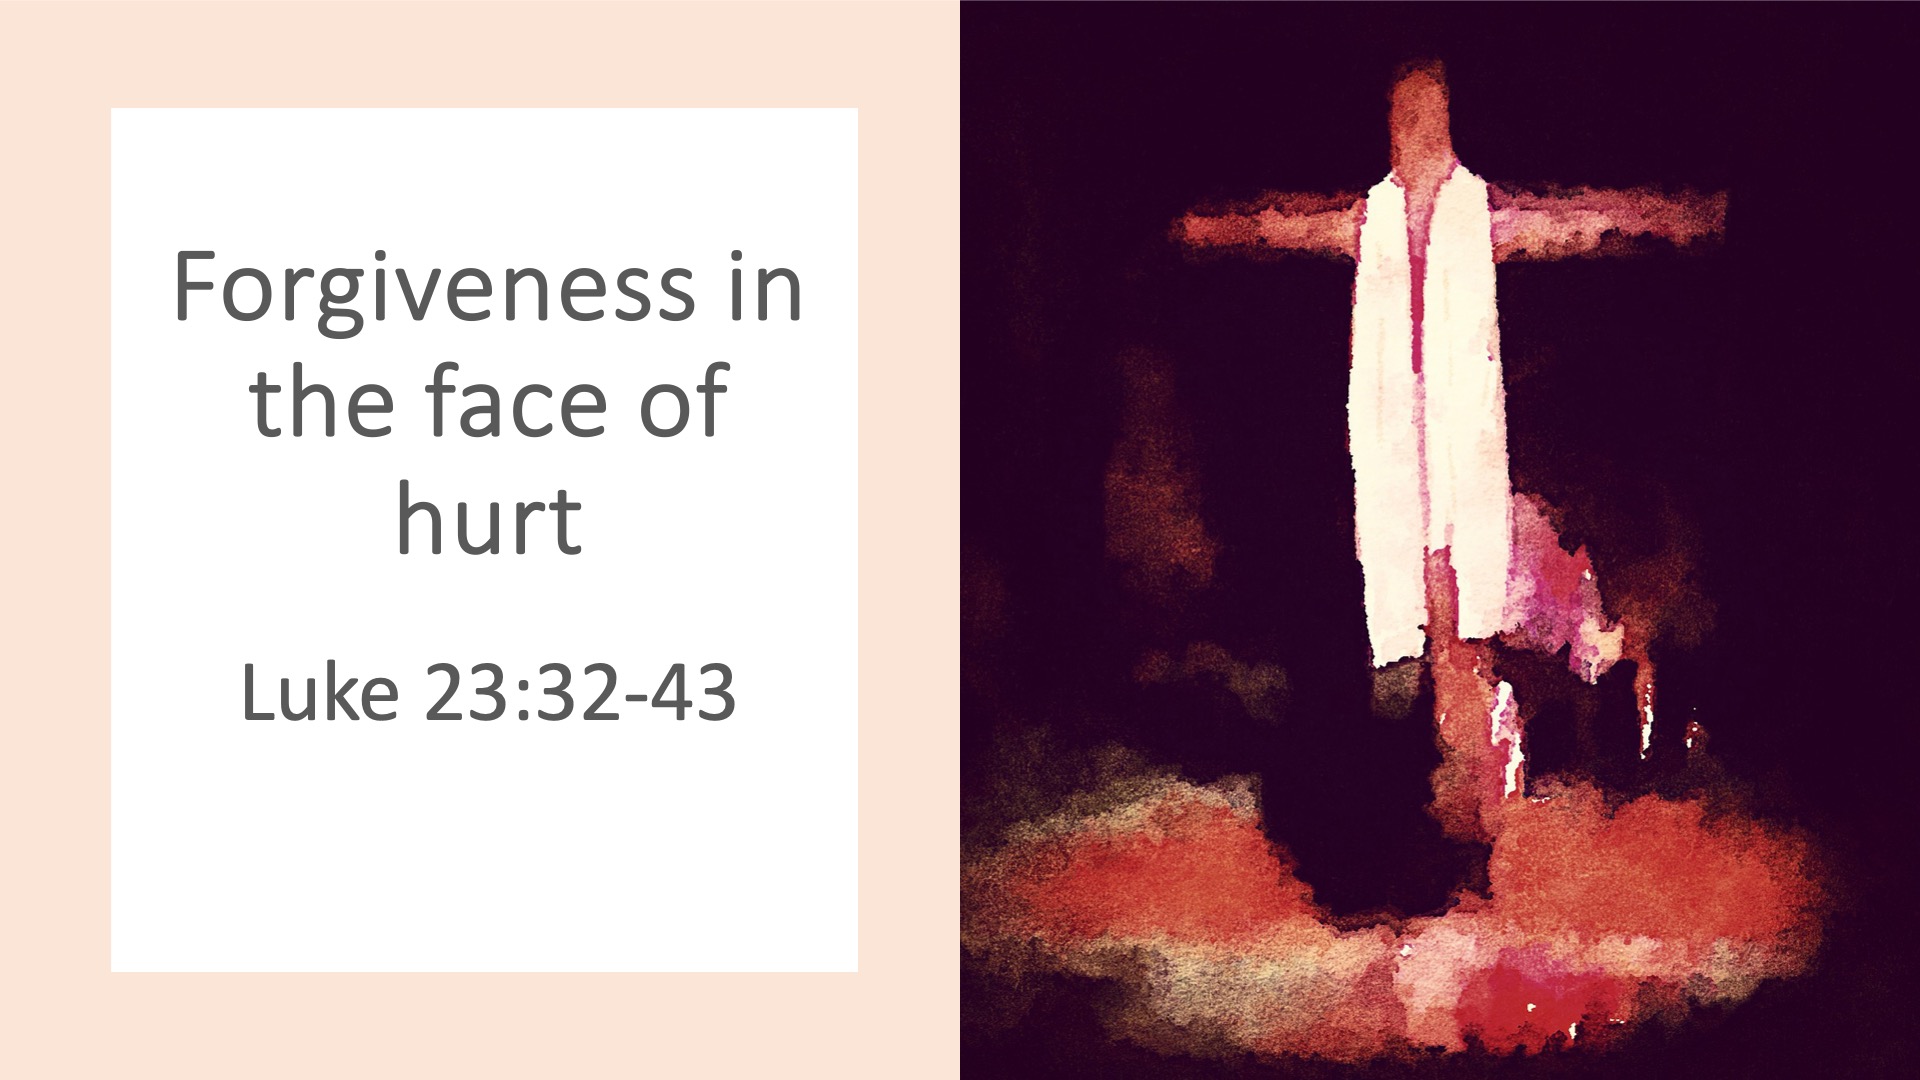 Forgiveness in the face of hurt